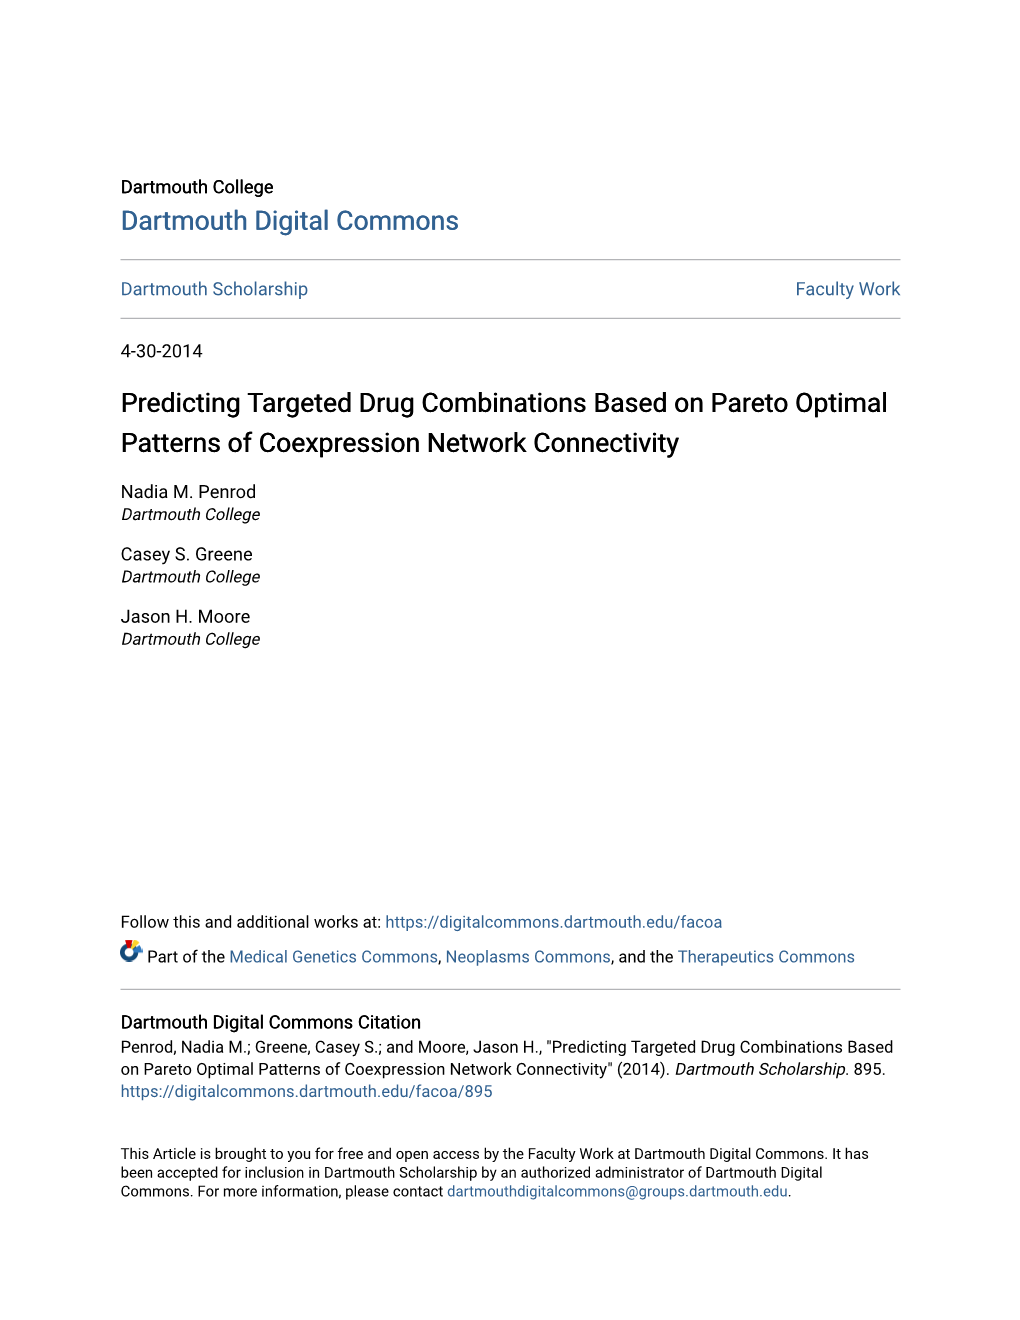 Predicting Targeted Drug Combinations Based on Pareto Optimal Patterns of Coexpression Network Connectivity